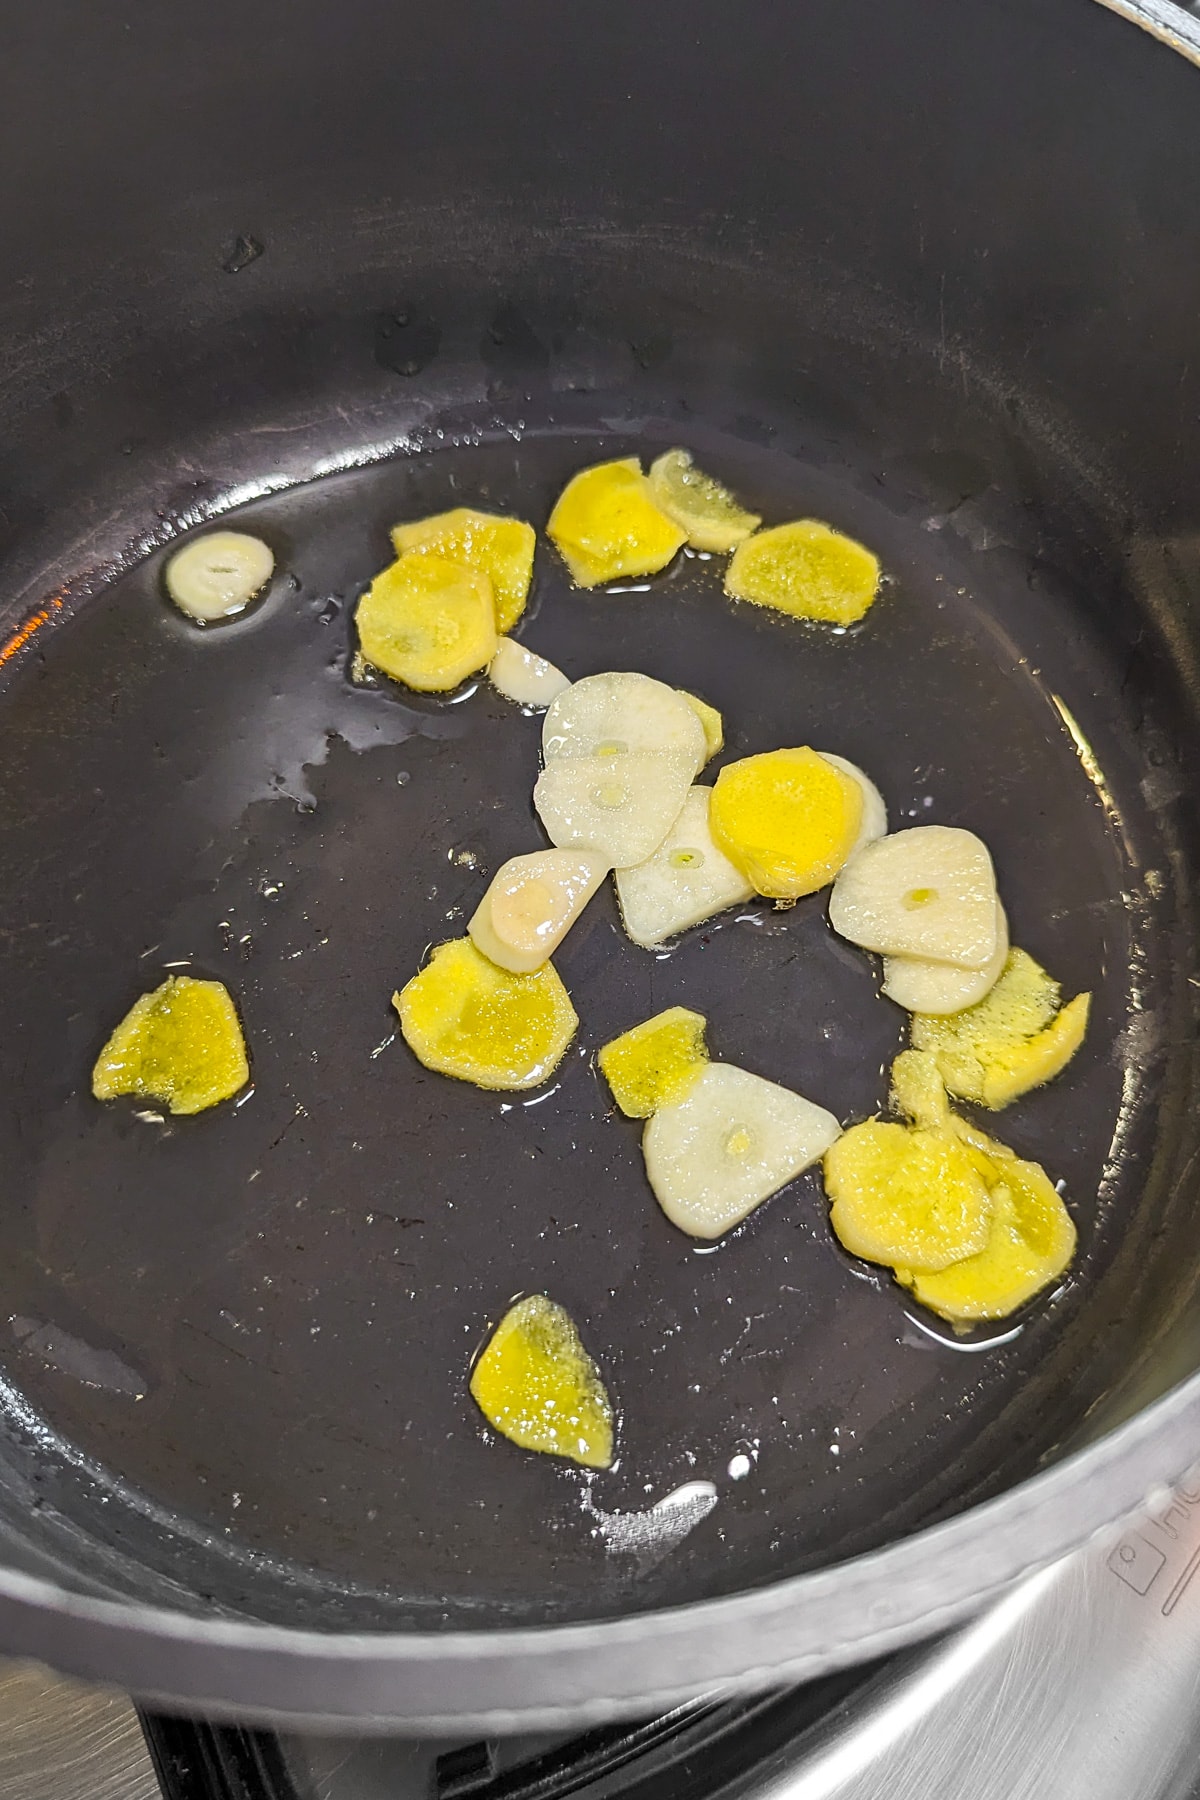 Frying ginger and garlic in a pan on the stove.